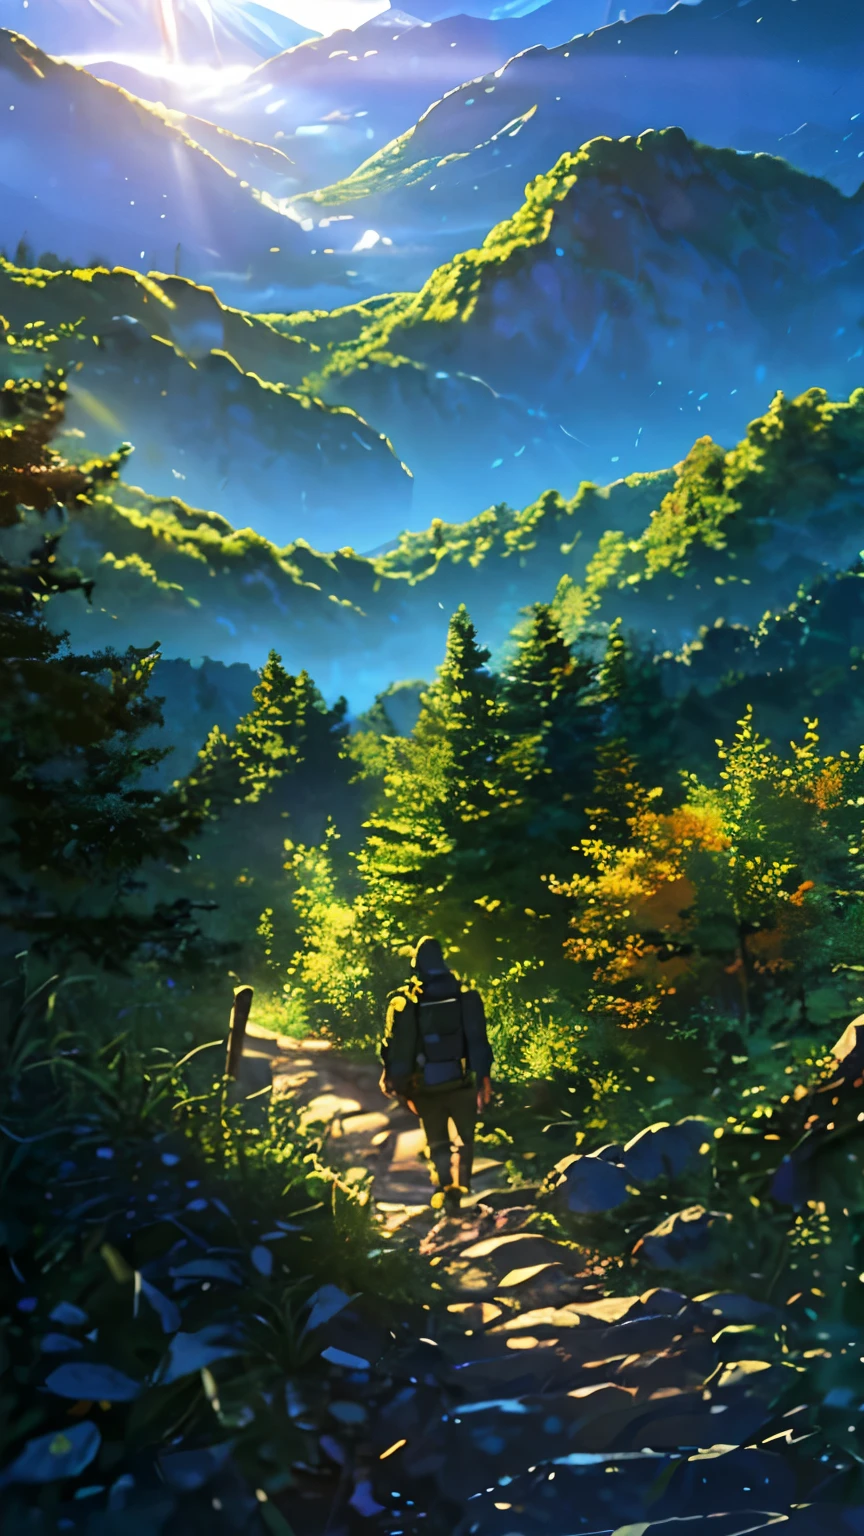 A rugged mountain trail winds its way up a steep slope, disappearing into a dense forest canopy. Sunlight filters through the leaves, dappling the path with patches of golden light. A hiker, clad in sturdy boots and a backpack, pauses midway, gazing out at the breathtaking vista below. The distant peaks are shrouded in mist, hinting at the challenges and adventures yet to come. In the hiker's hand is a weathered map, marked with trails yet to be explored and destinations waiting to be discovered.